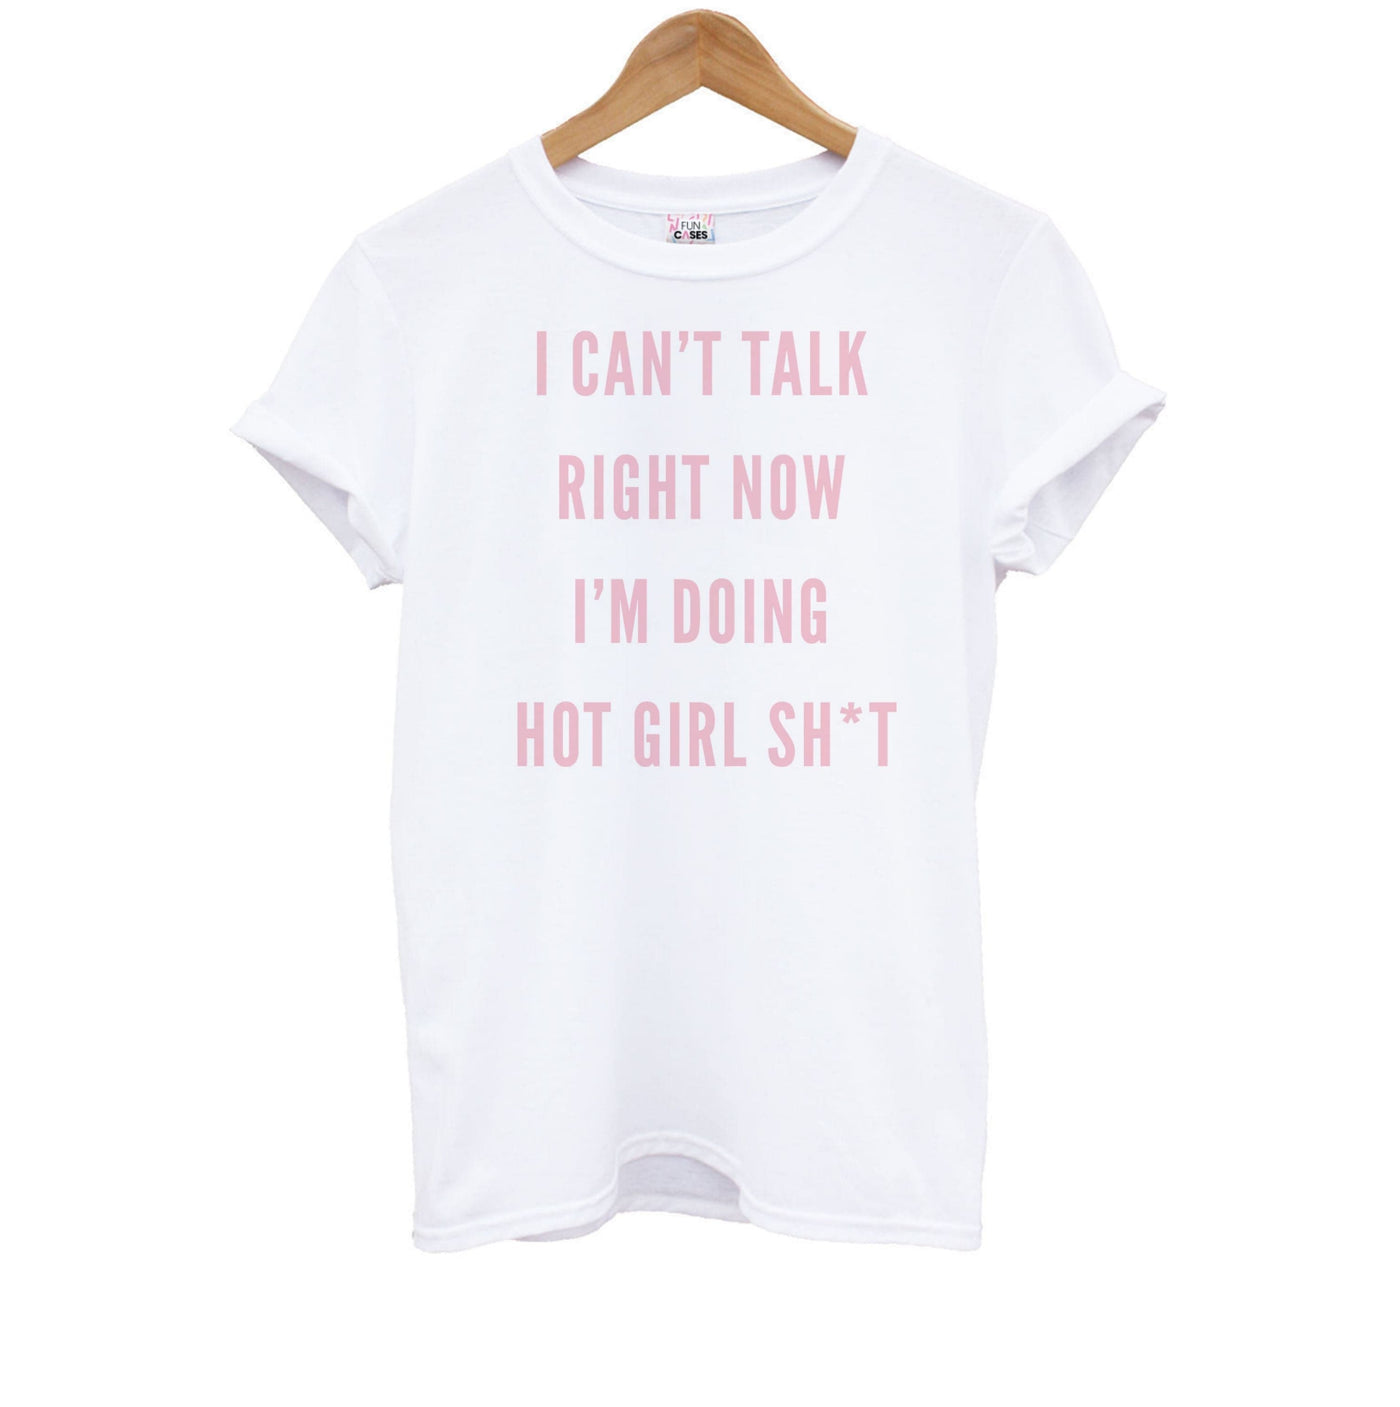 I Can't Talk Right Now I'm Doing Hot Girl Shit Kids T-Shirt